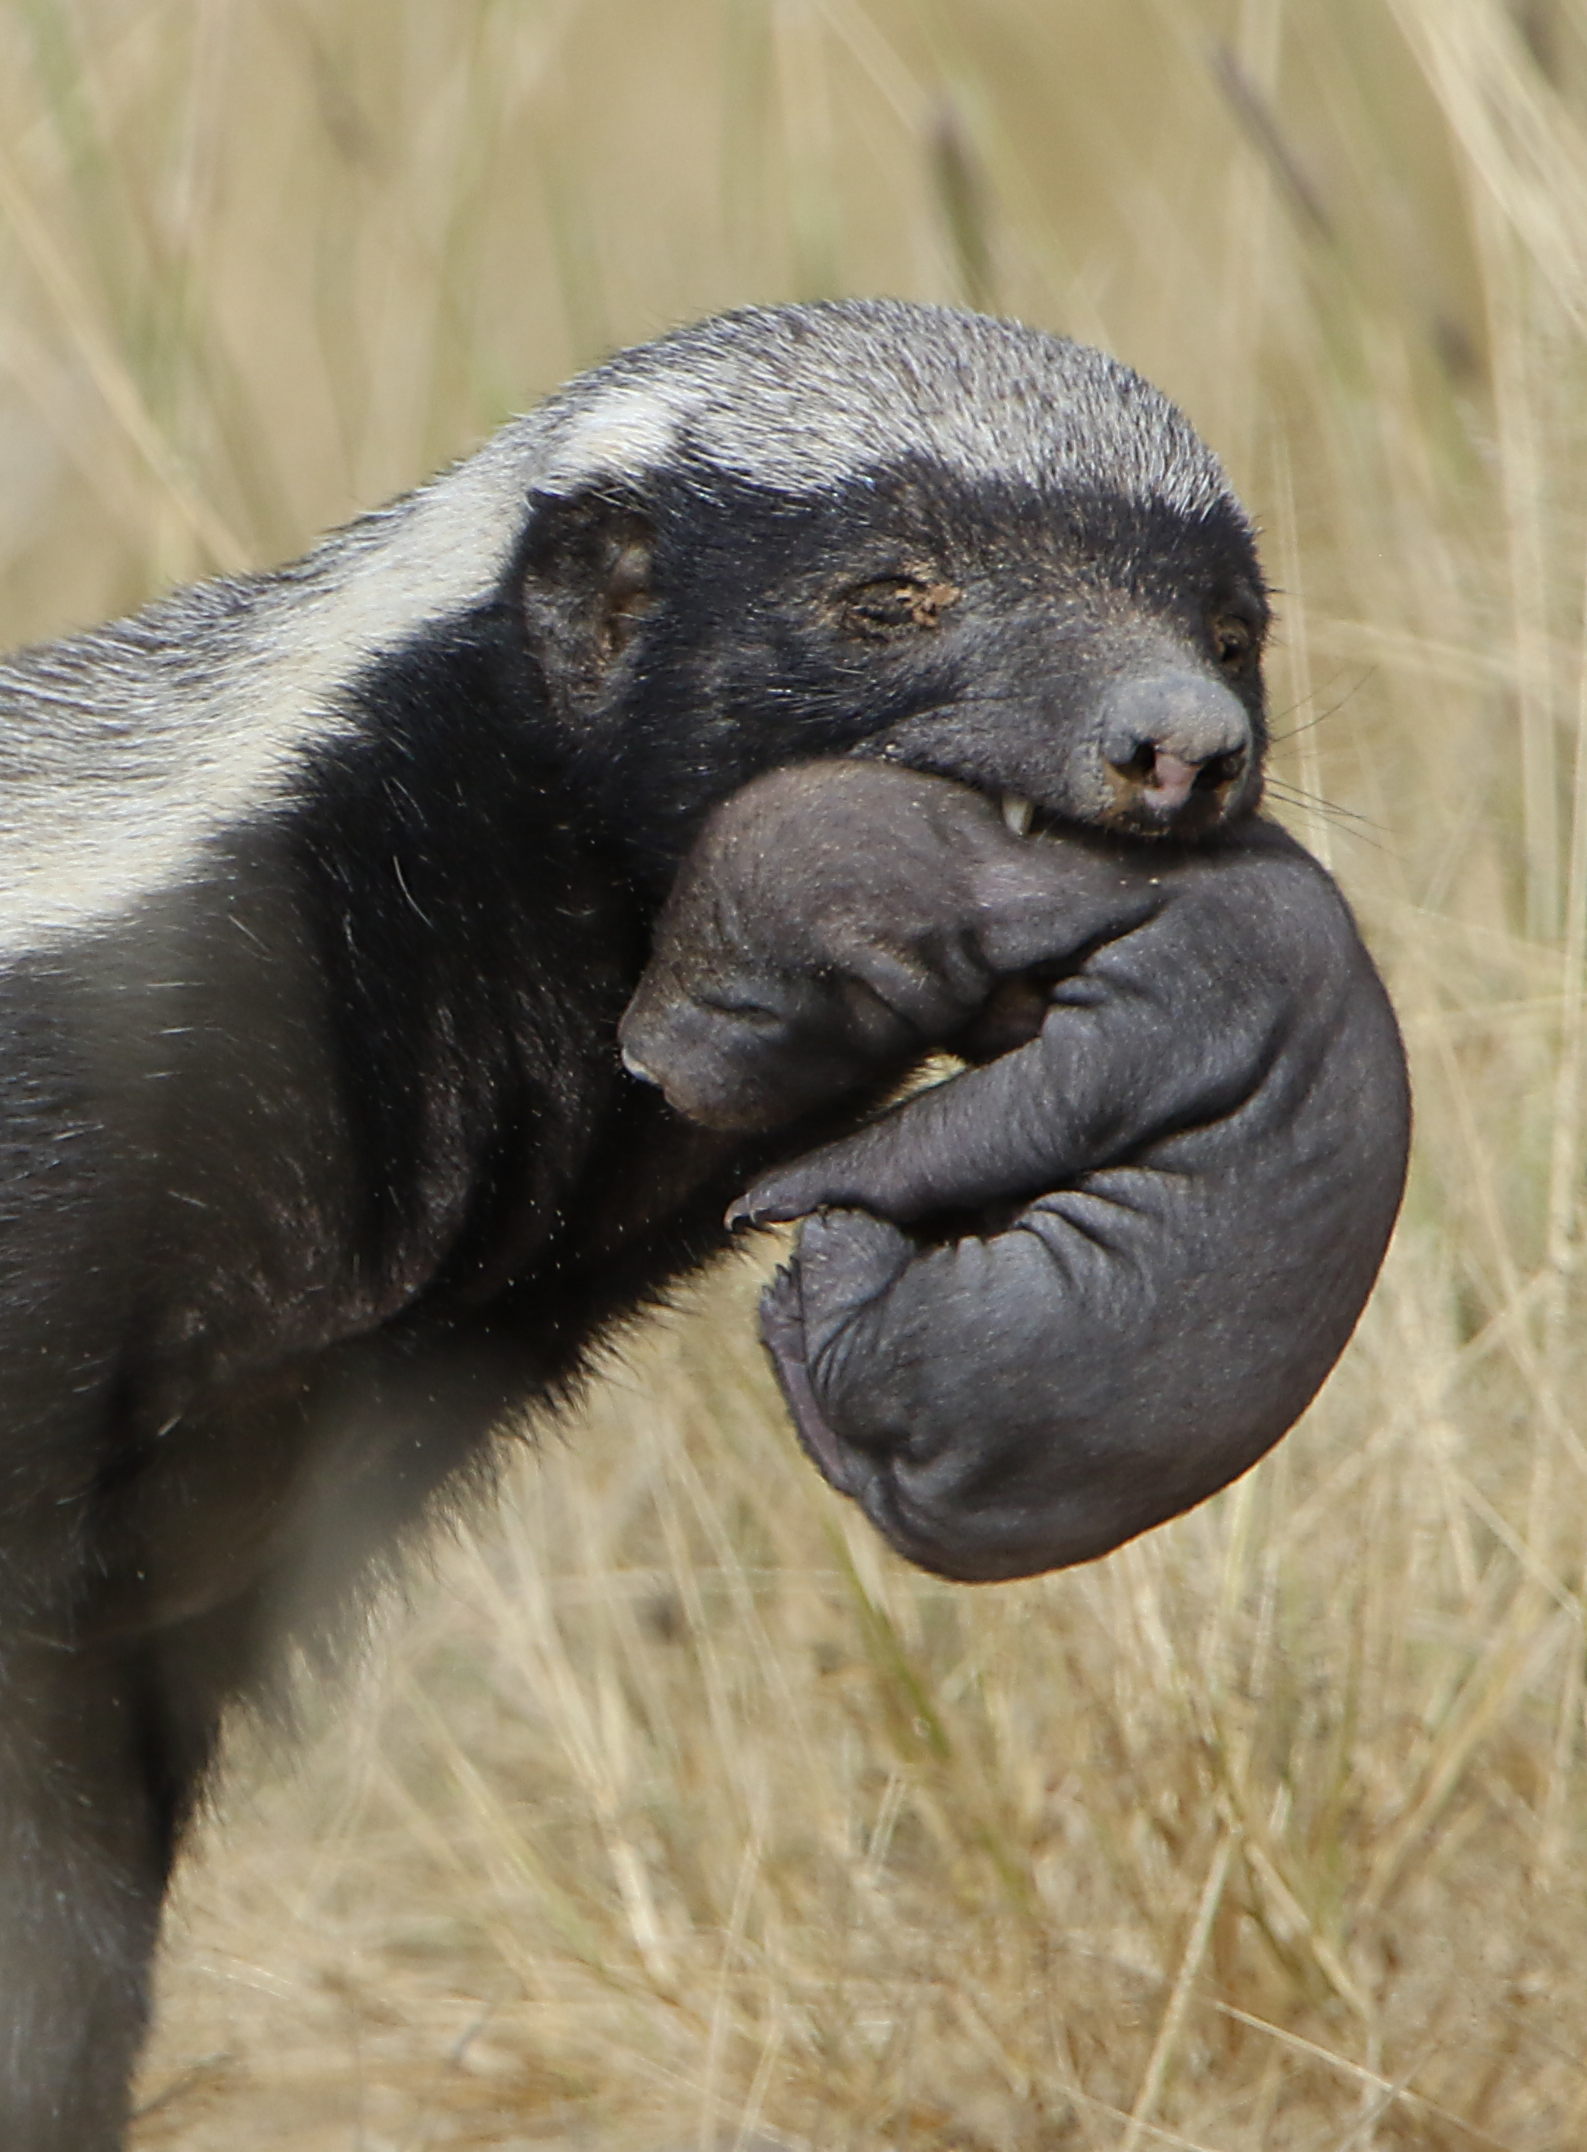 Creative Honey Badger Keeps Finding Genius Ways Of Escaping His Cage ...